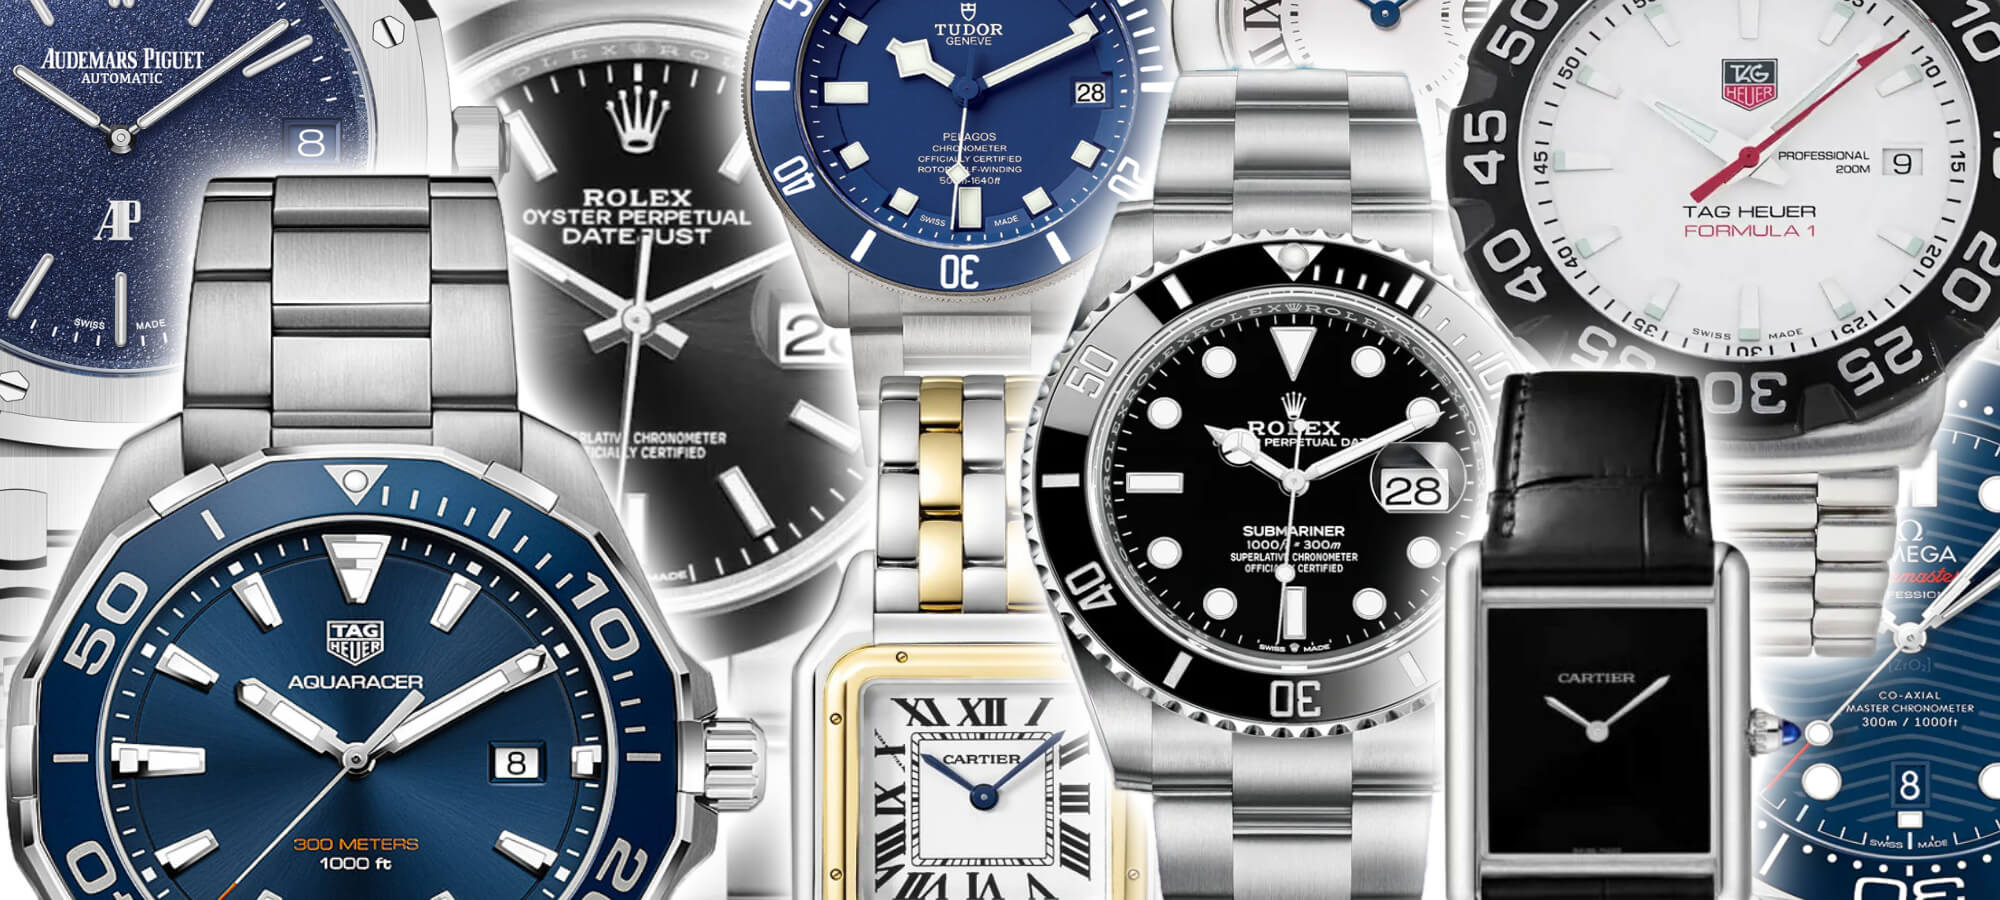 What TAG Heuer Watch is The Most Popular?